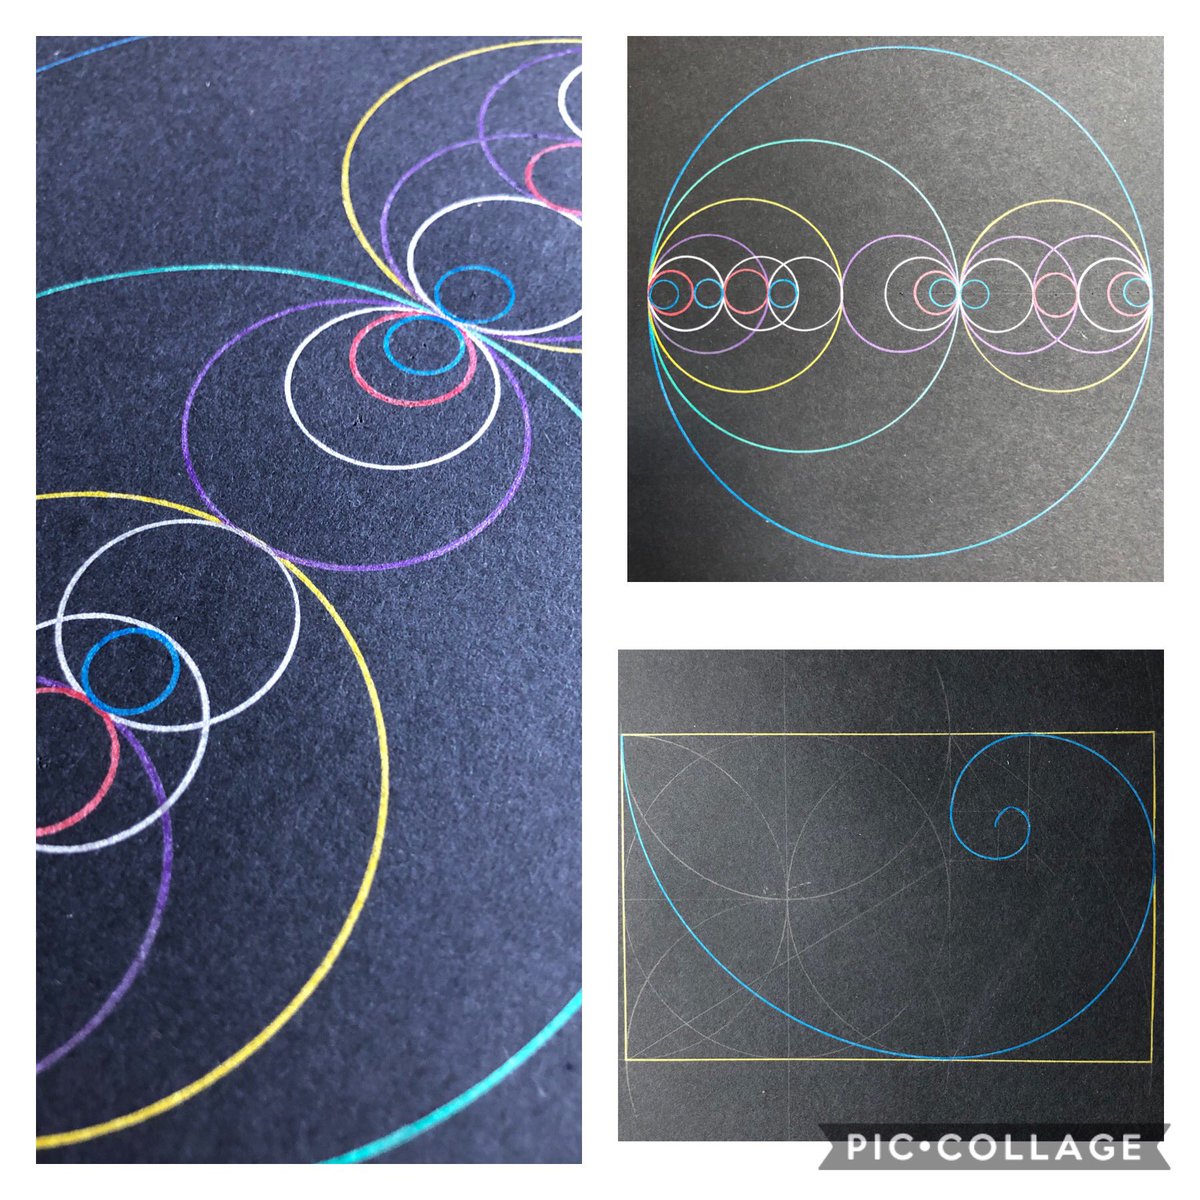 Finally caught up on session 3 of #itga with @c0mplexnumber. Love the golden ratio circles but a bit inaccurate on the golden spiral! #artfulaugust